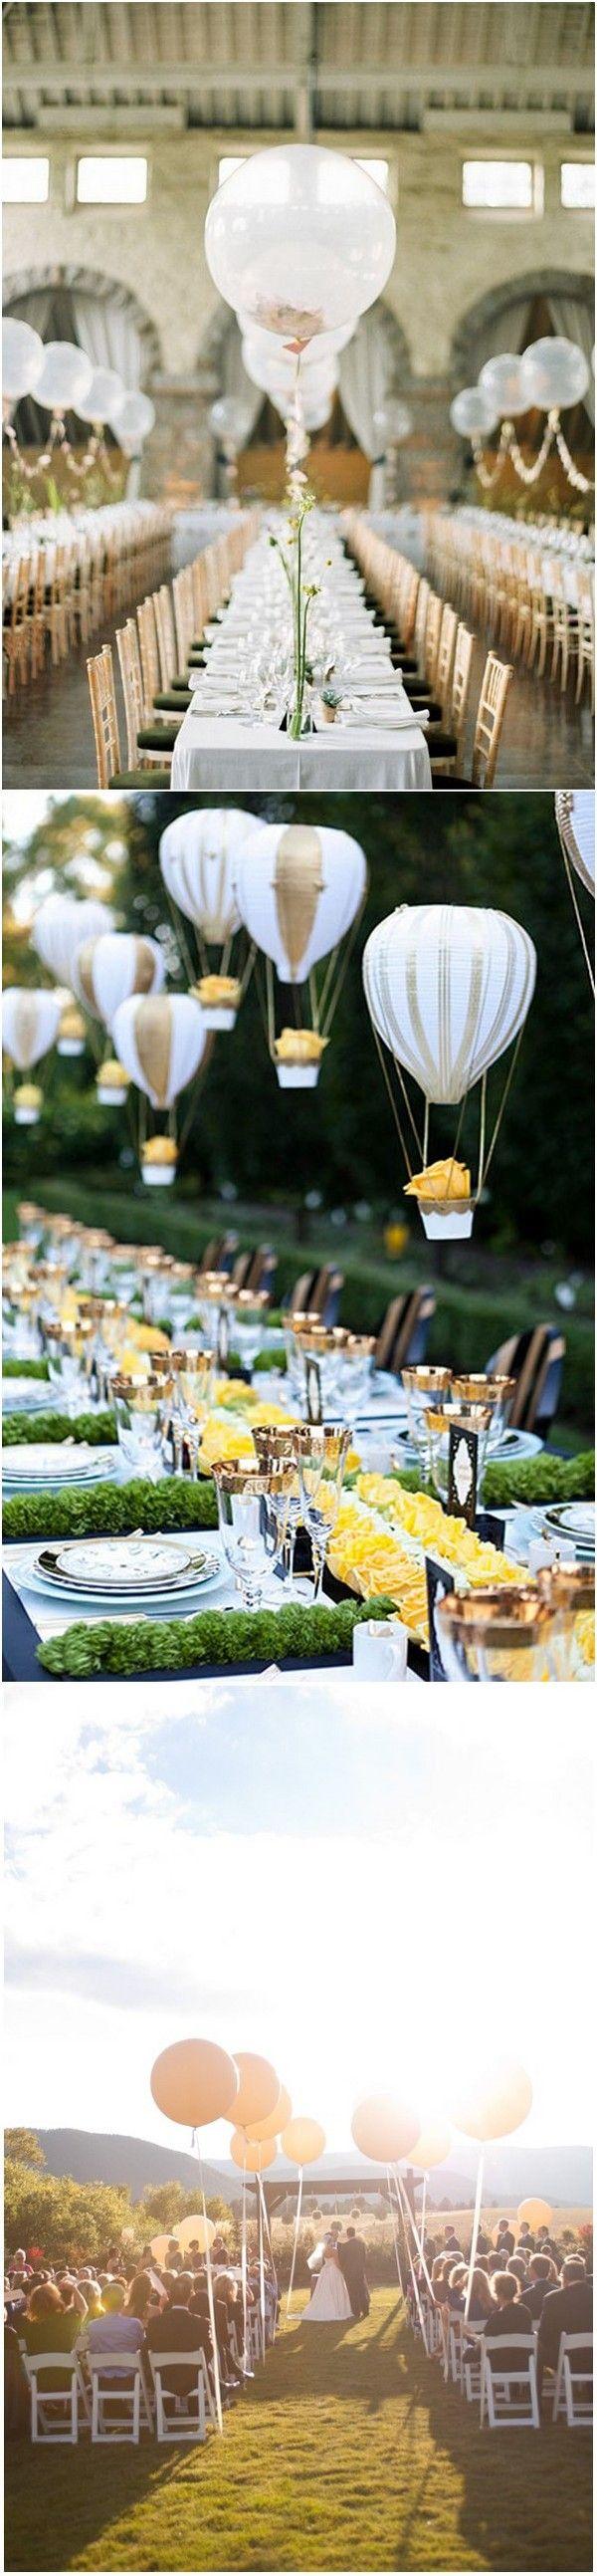 Wedding - 16 Romantic Wedding Decoration Ideas With Balloons - Page 3 Of 3